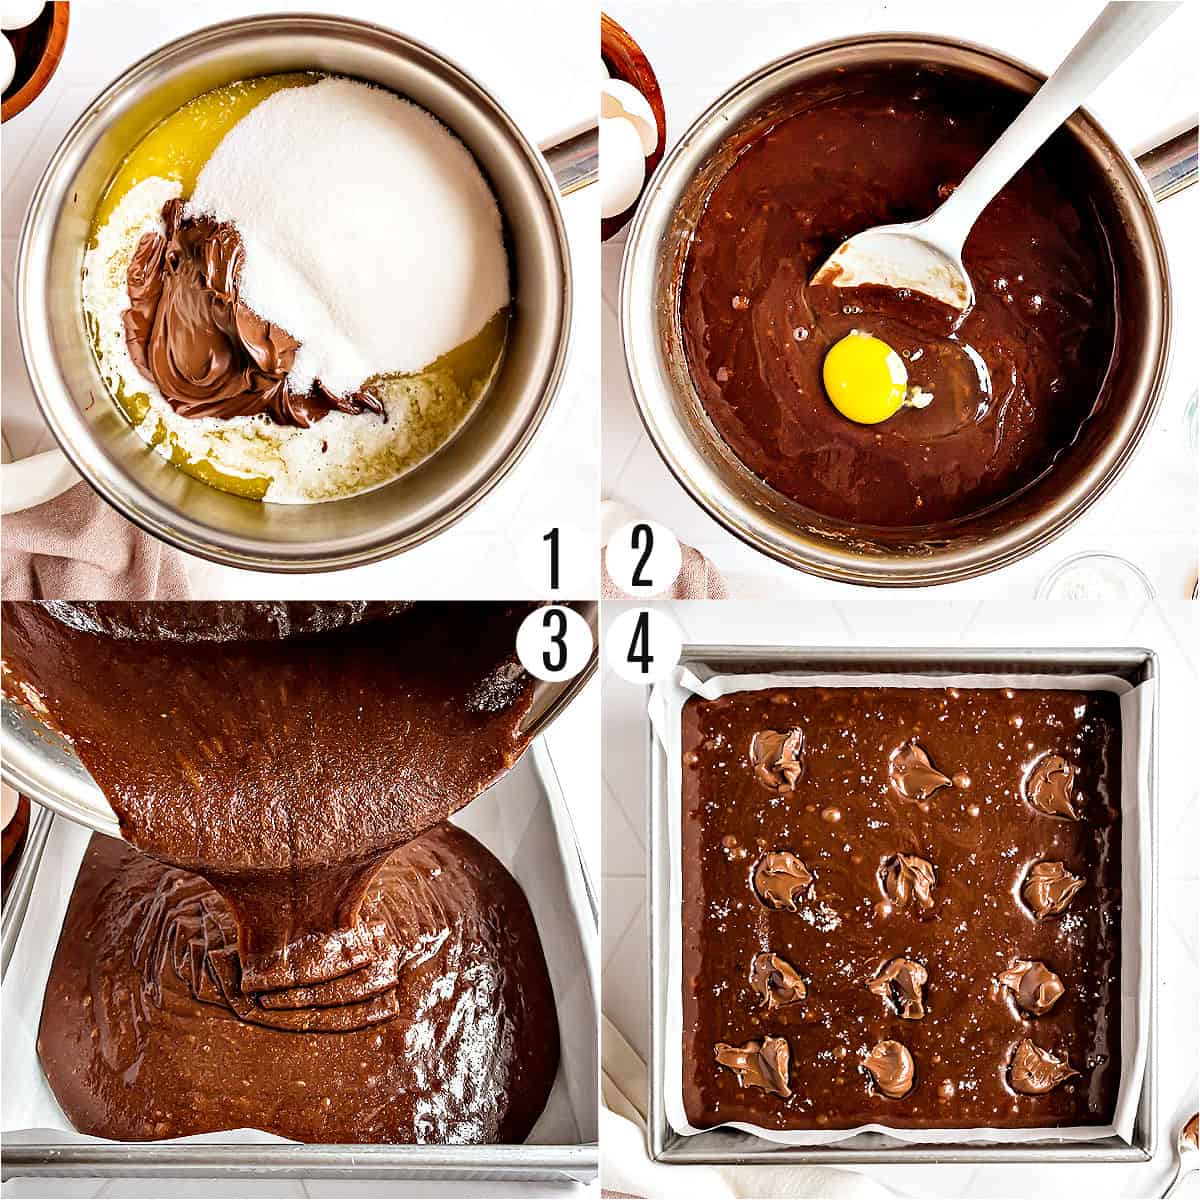 Step by step photos showing how to make nutella brownies.